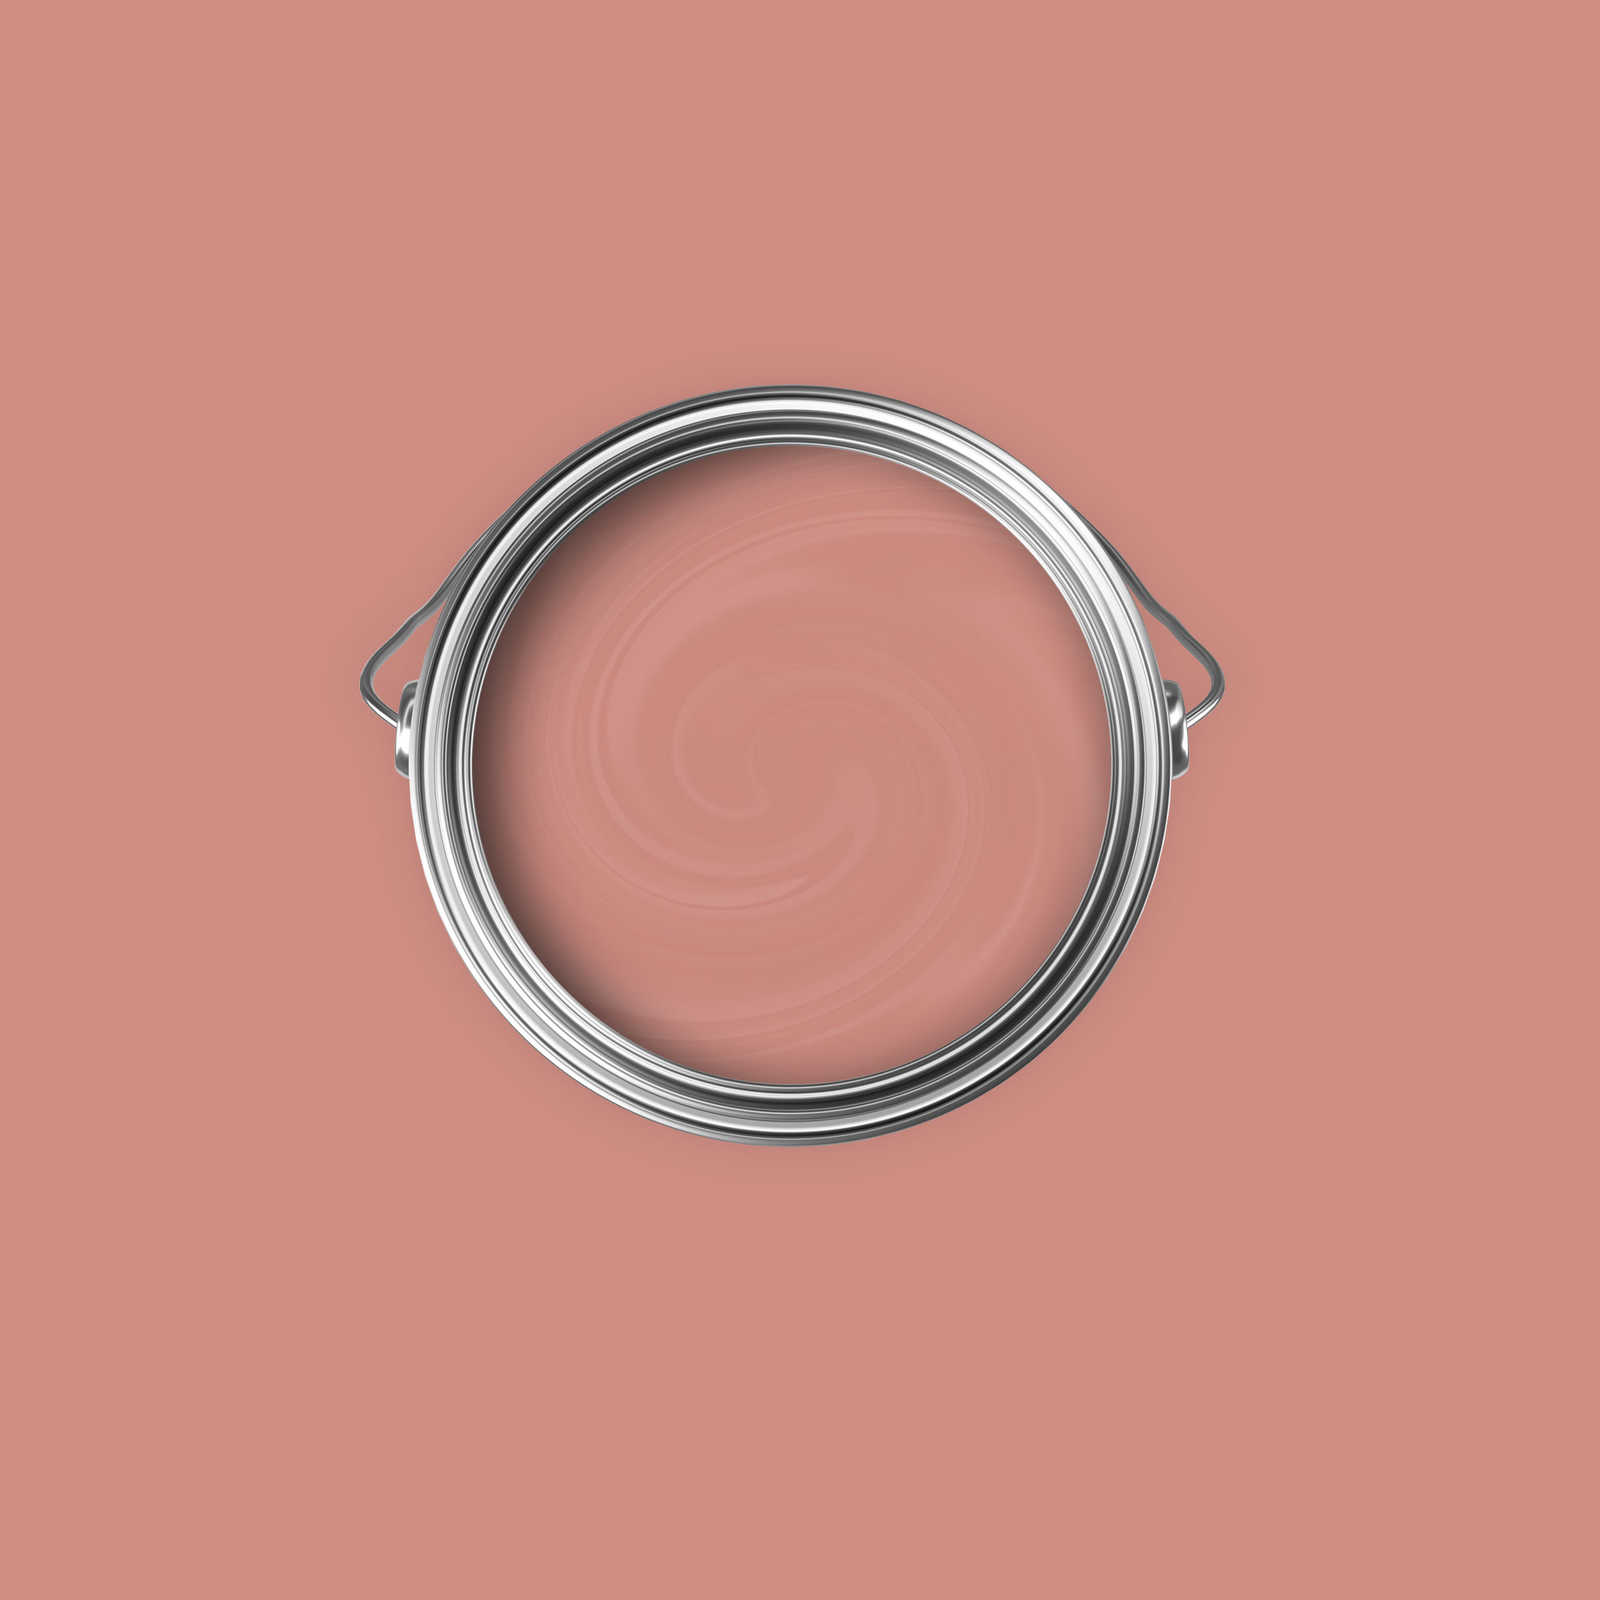             Premium Wall Paint Relaxing Salmon »Luxury Lipstick« NW1004 – 2.5 litre
        